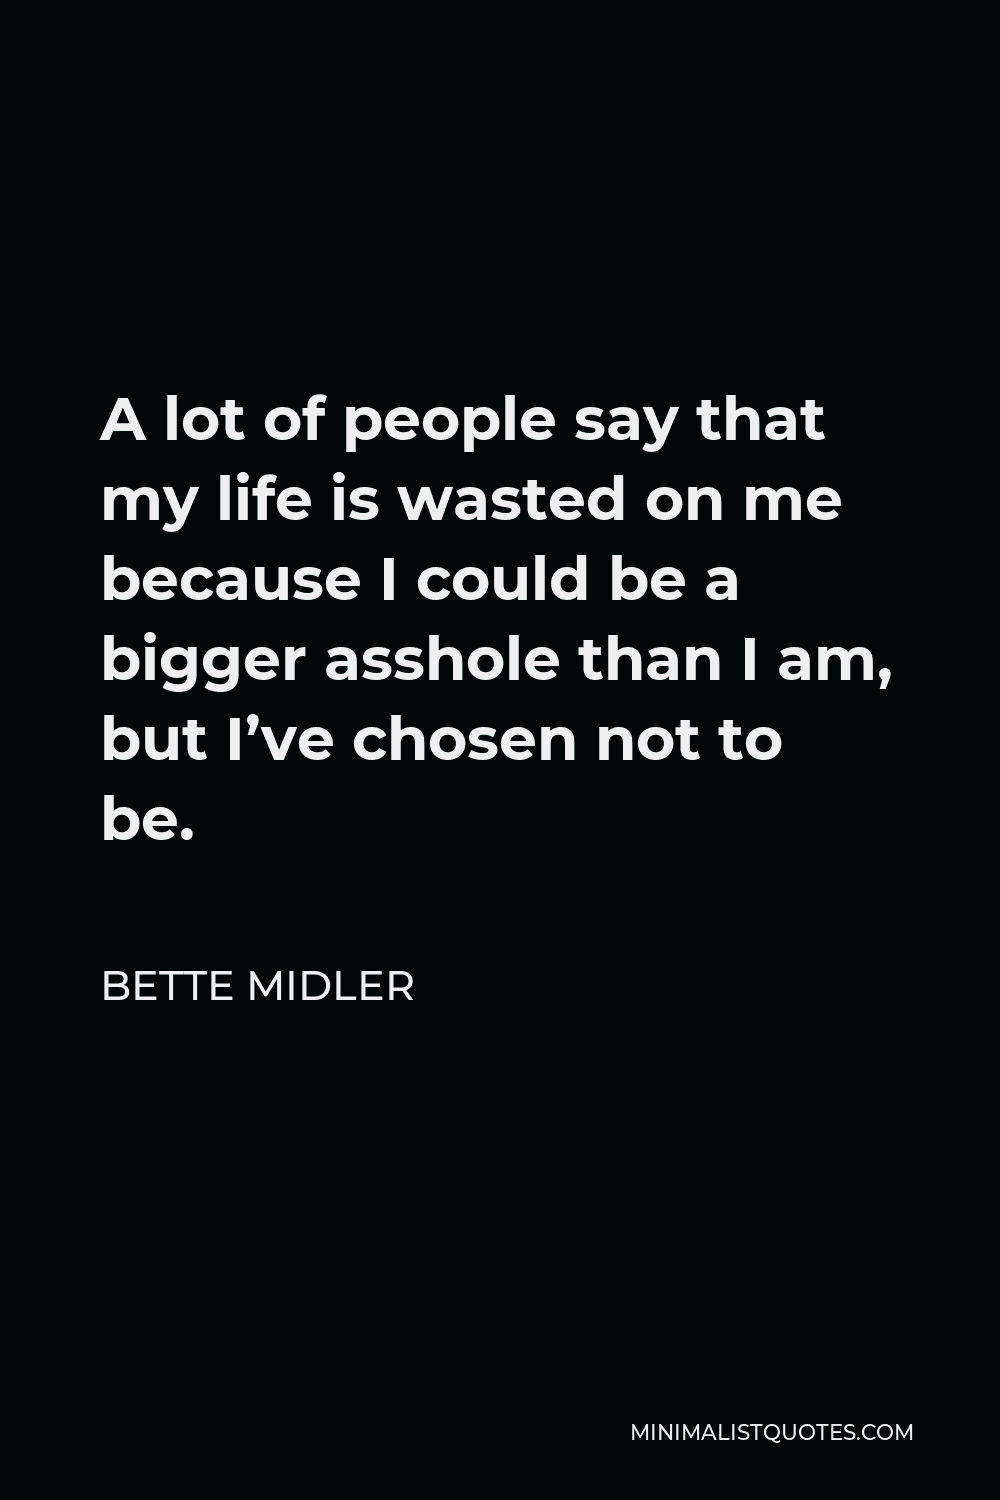 Bette Midler Quote - A lot of people say that my life is wasted on me because I could be a bigger asshole than I am, but I’ve chosen not to be.